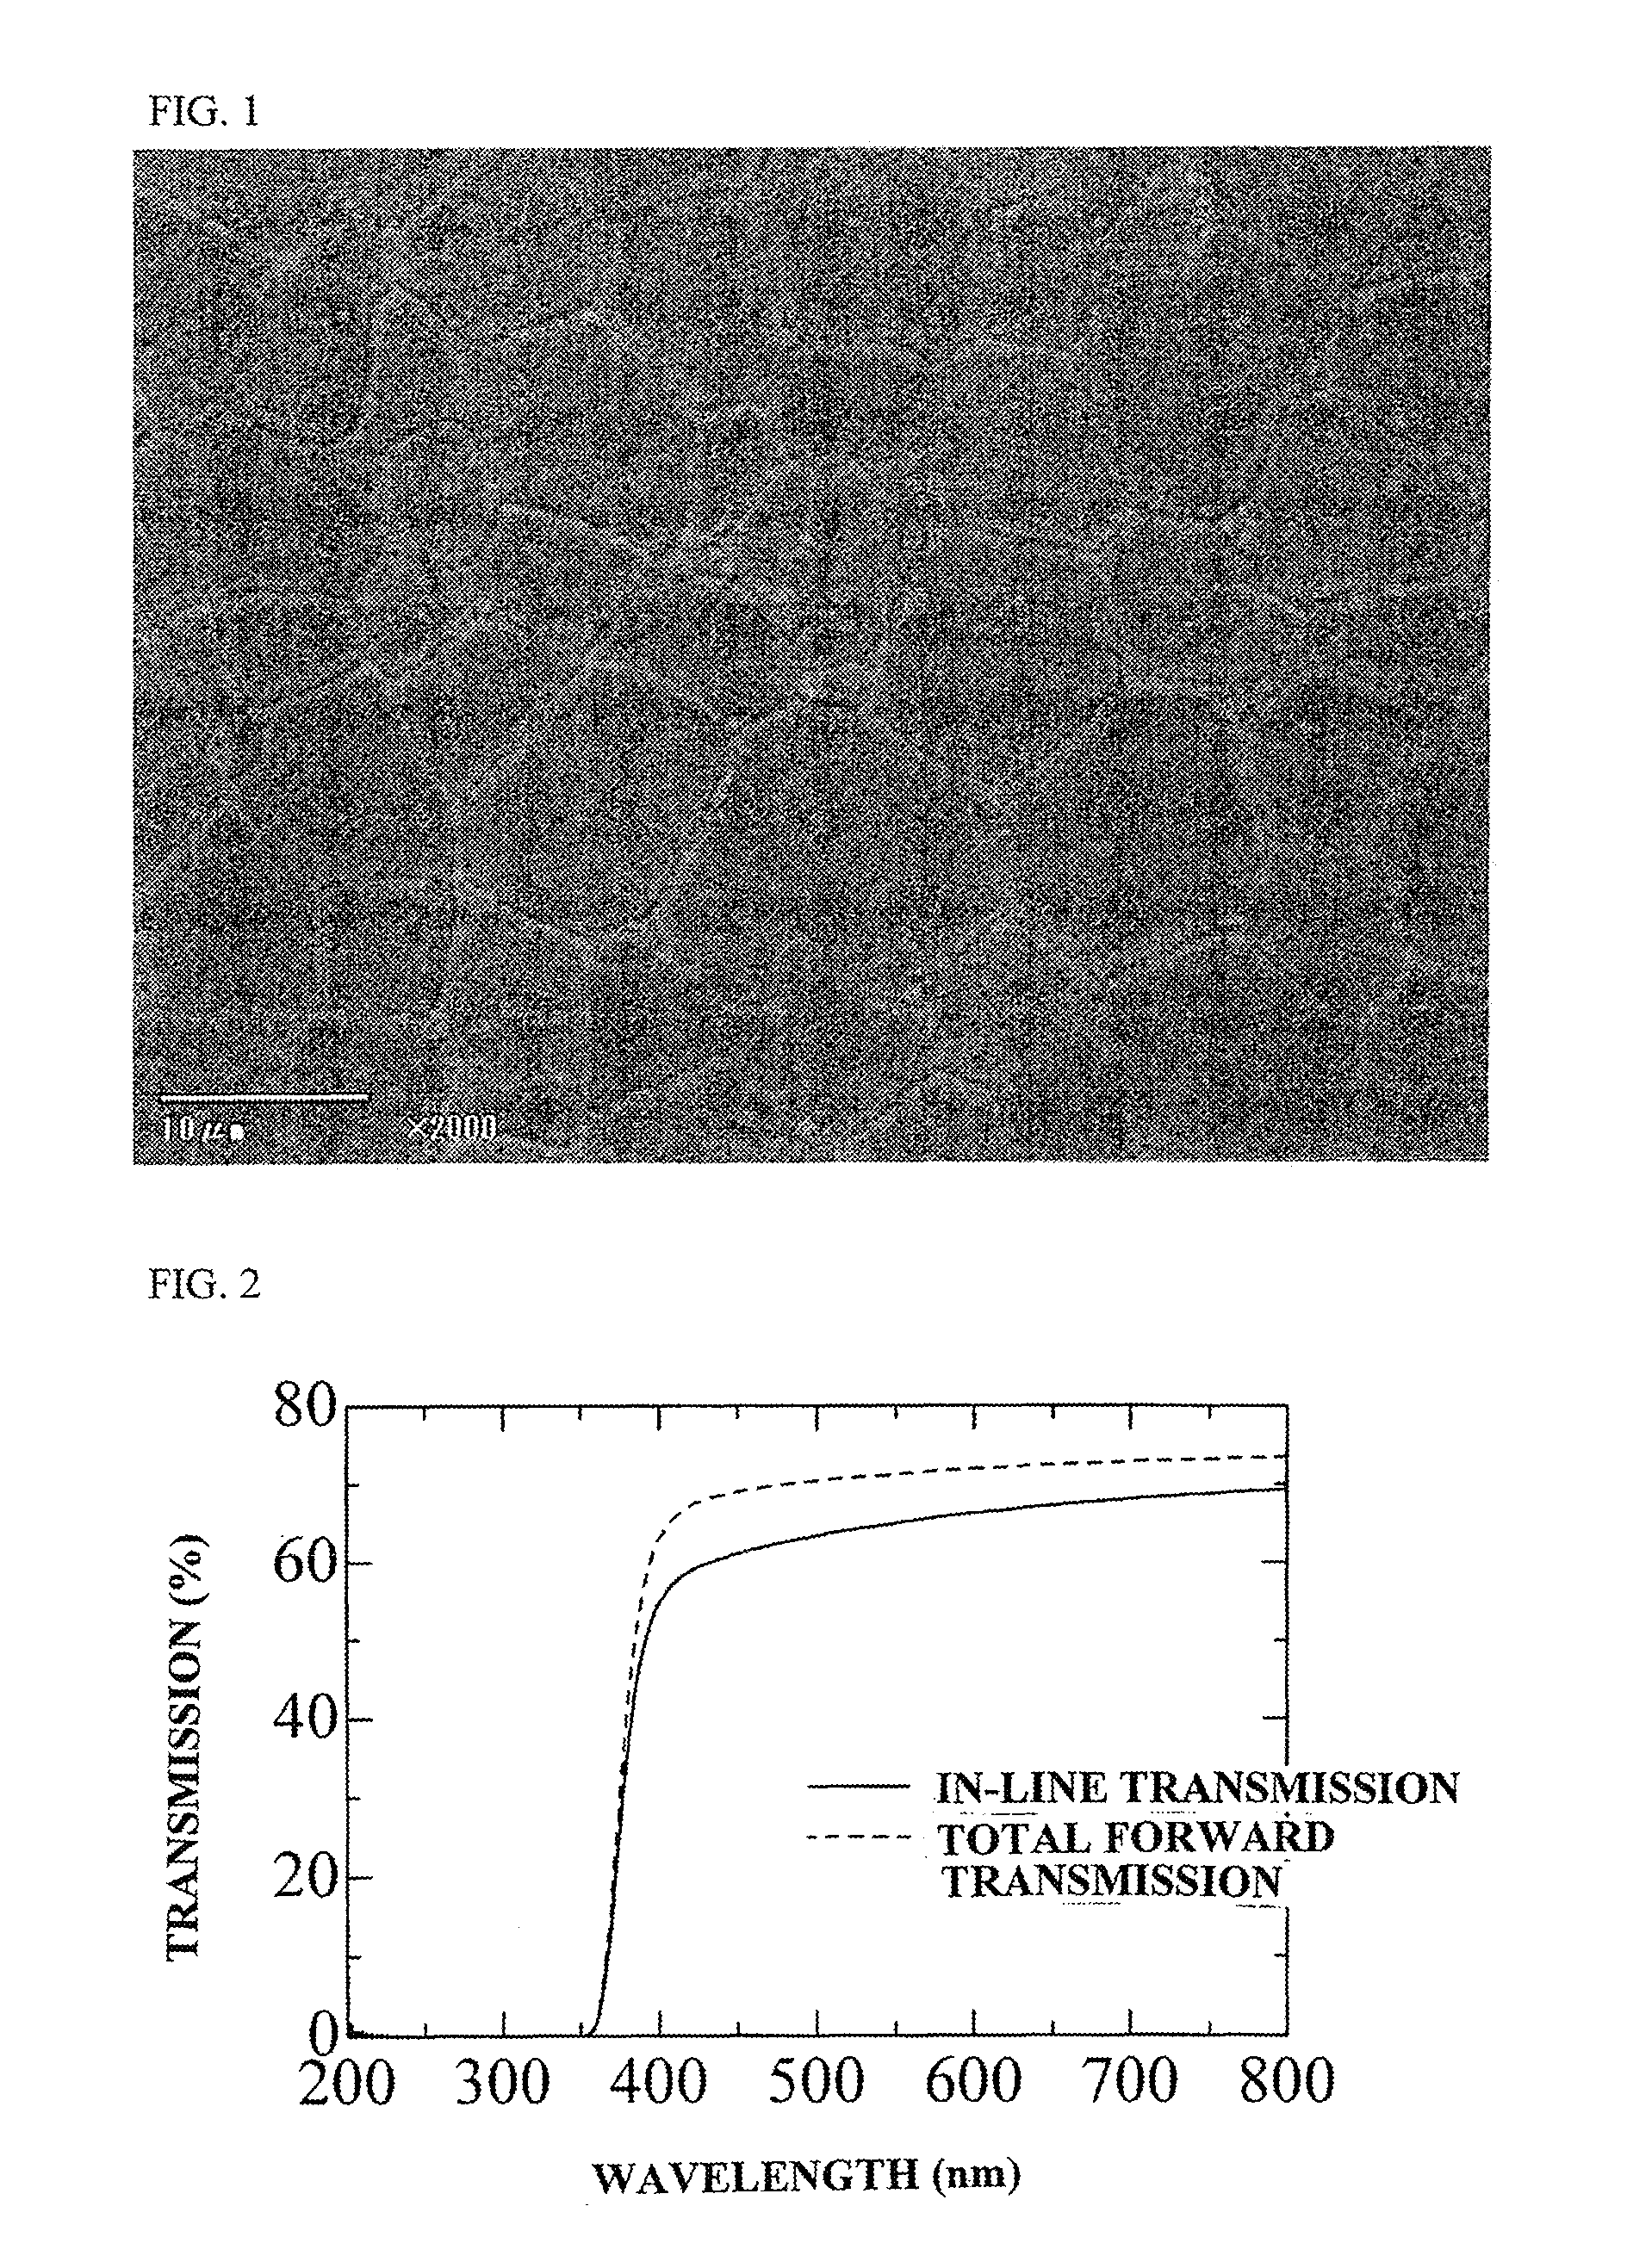 High-strength transparent zirconia sintered body, process for producing the same, and uses thereof